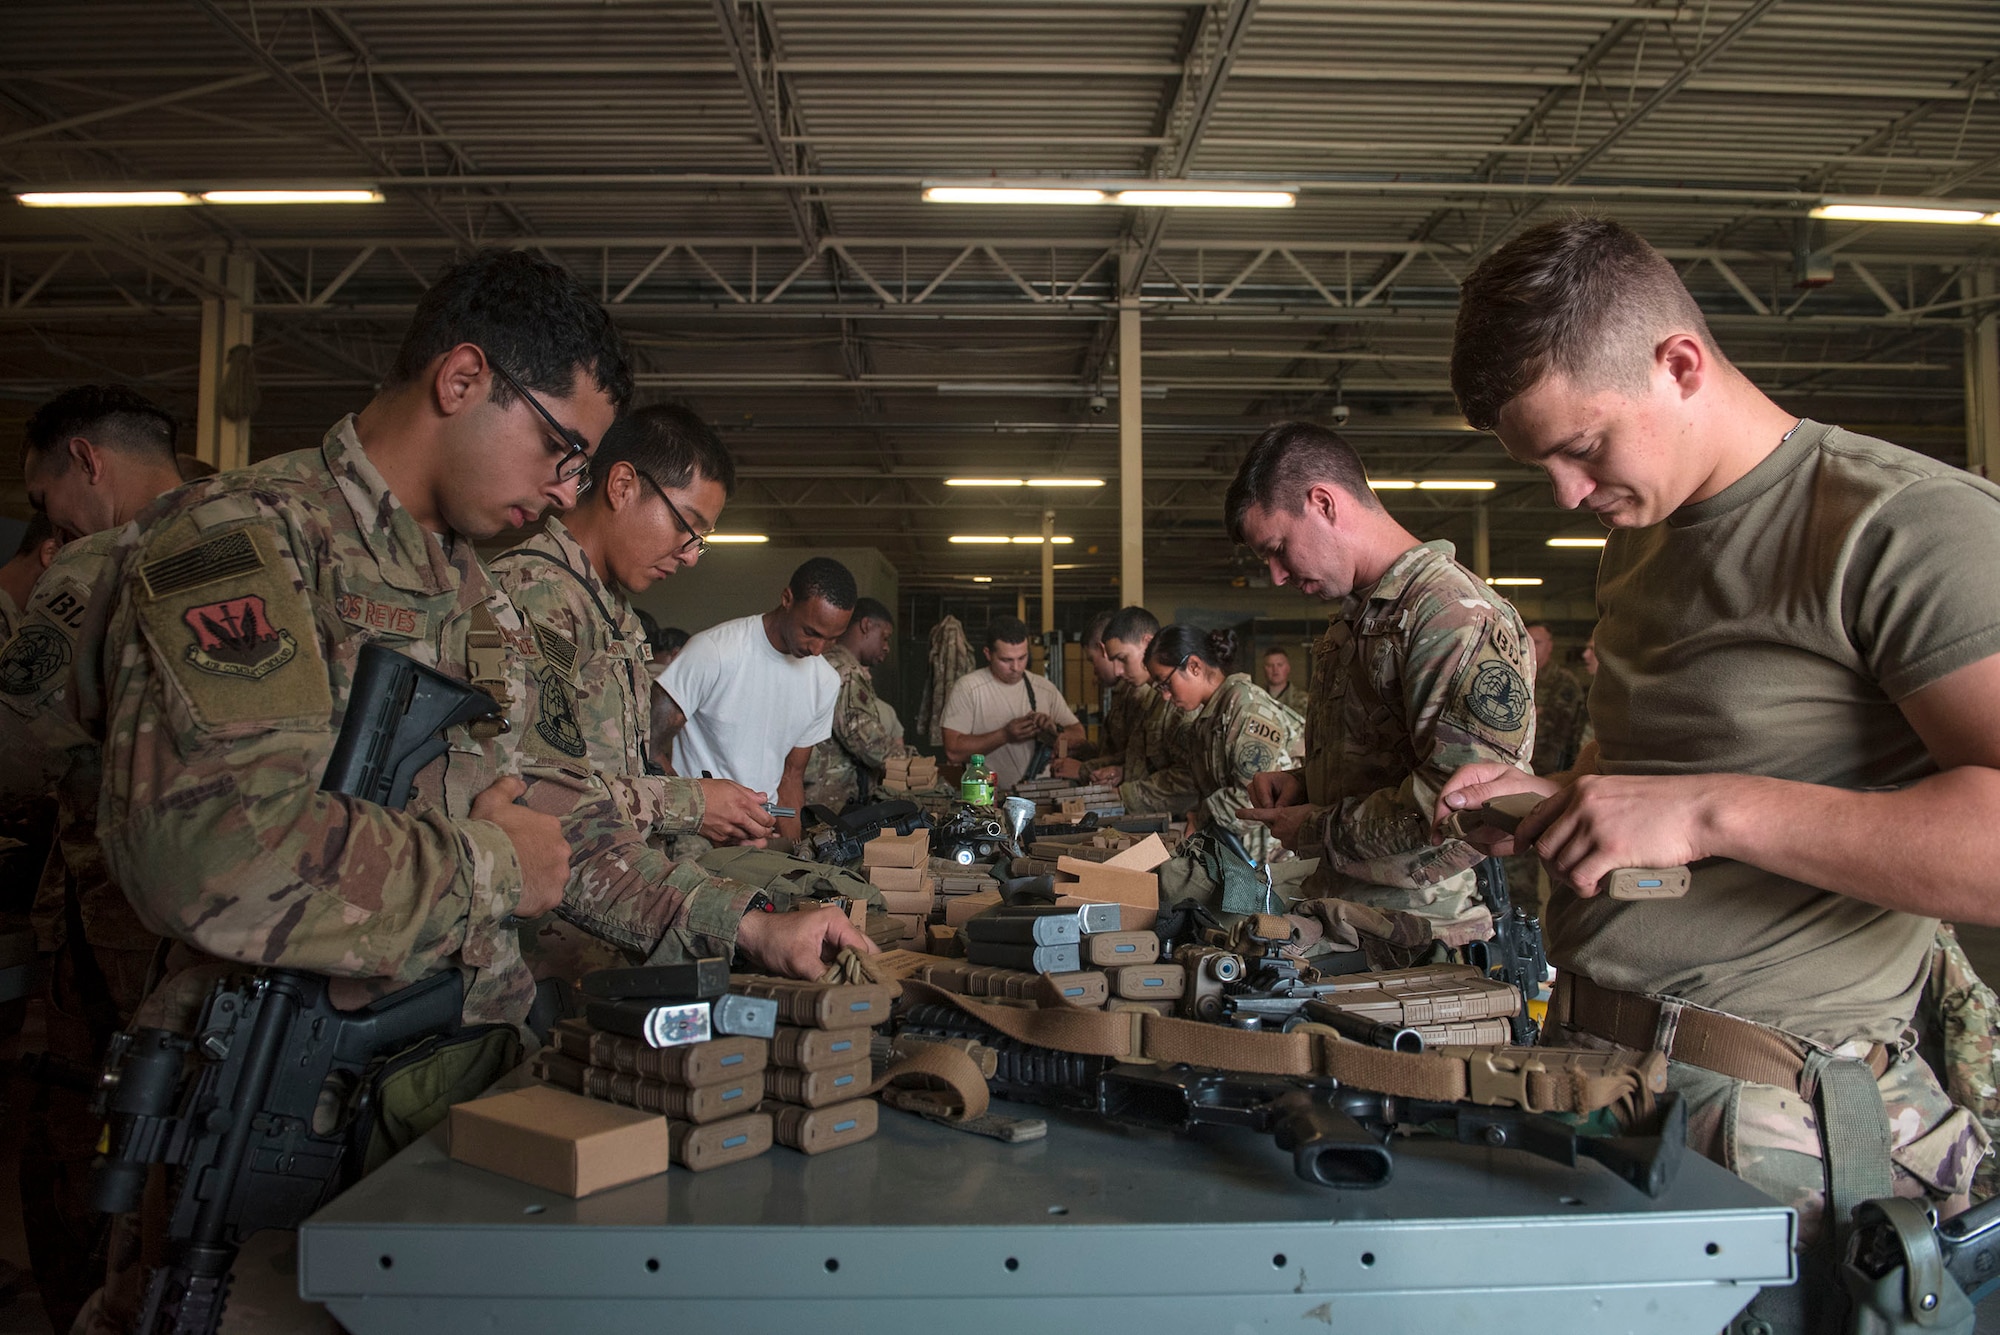 Defenders from the 822d Base Defense Squadron load ammunition prior to departing Moody Air Force Base, Ga., to provide base security at Tyndall AFB, Fla., during Hurricane Michael recovery efforts, Oct. 11, 2018. Moody’s ‘Safeside’ defenders will secure the area as Tyndall’s Ride Out Element conducts damage assessments during the aftermath. Since Oct. 8 and until further notice, Tyndall has been on evacuation notice. (U.S. Air Force photo by Senior Airman Greg Nash)